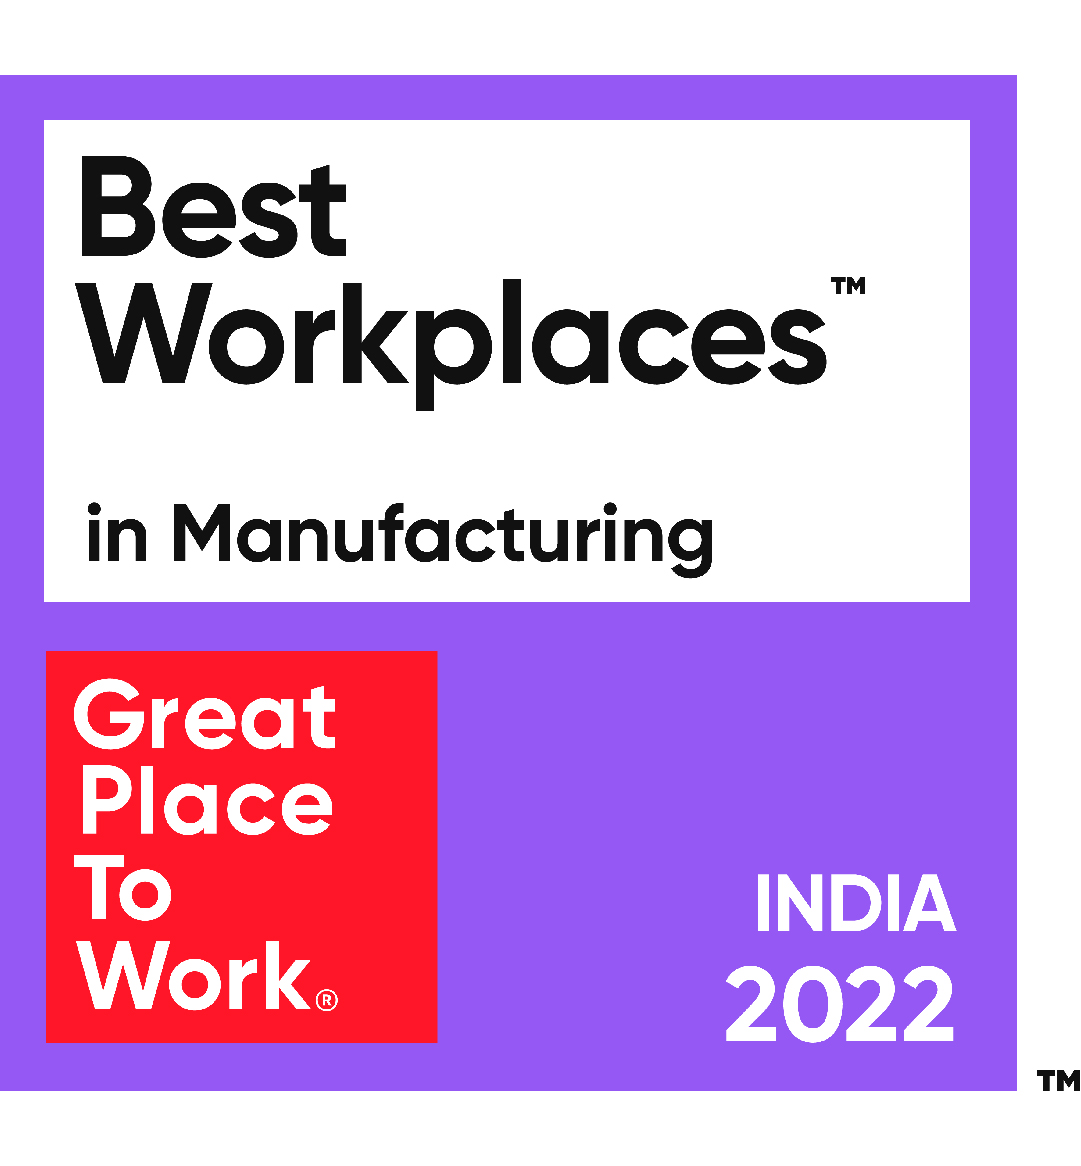 LOGO_INDIA'S BEST WORKPLACES IN MANUFACTURING 2022_demographic